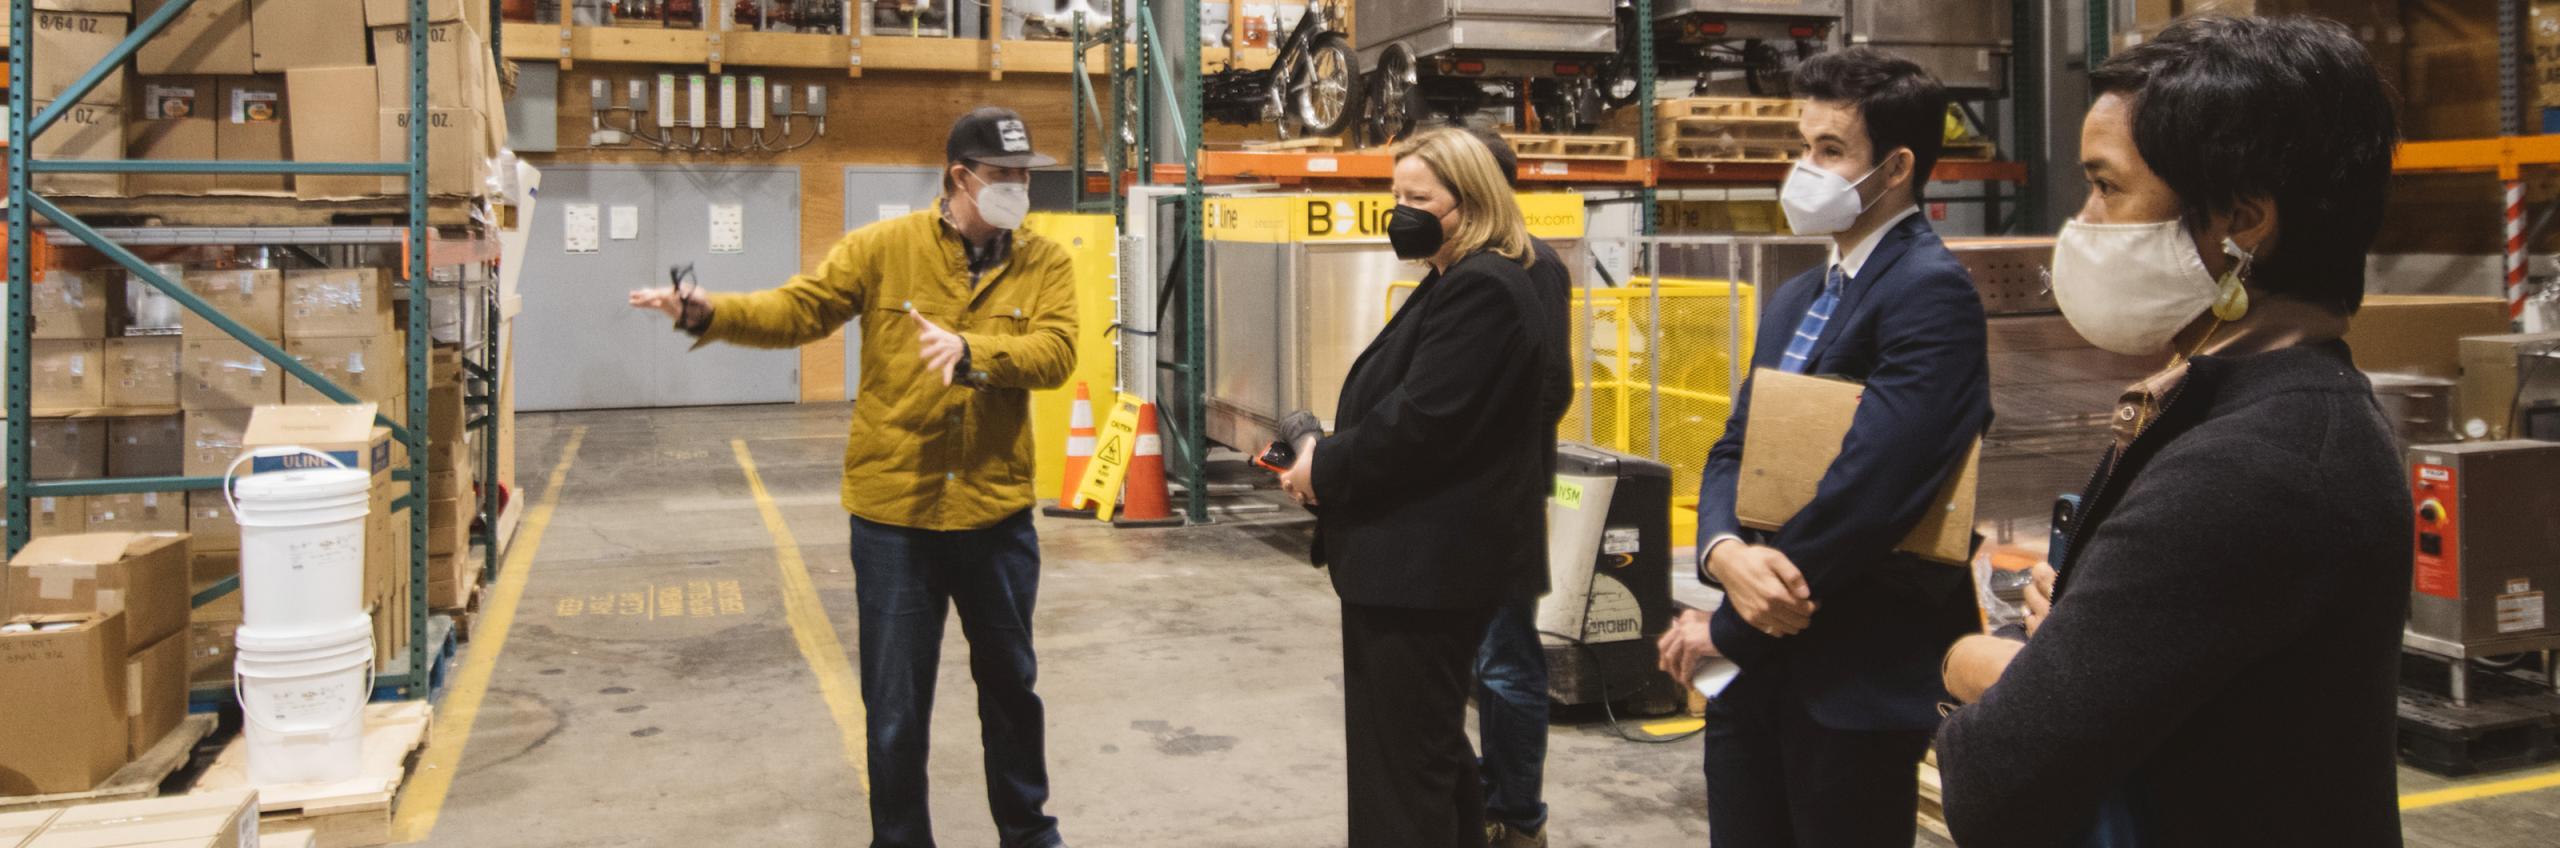 A photo of four people standing in a warehouse. The person on the left is speaking and gesturing with his hands, while the other three listen and gaze in the direction of his hands.